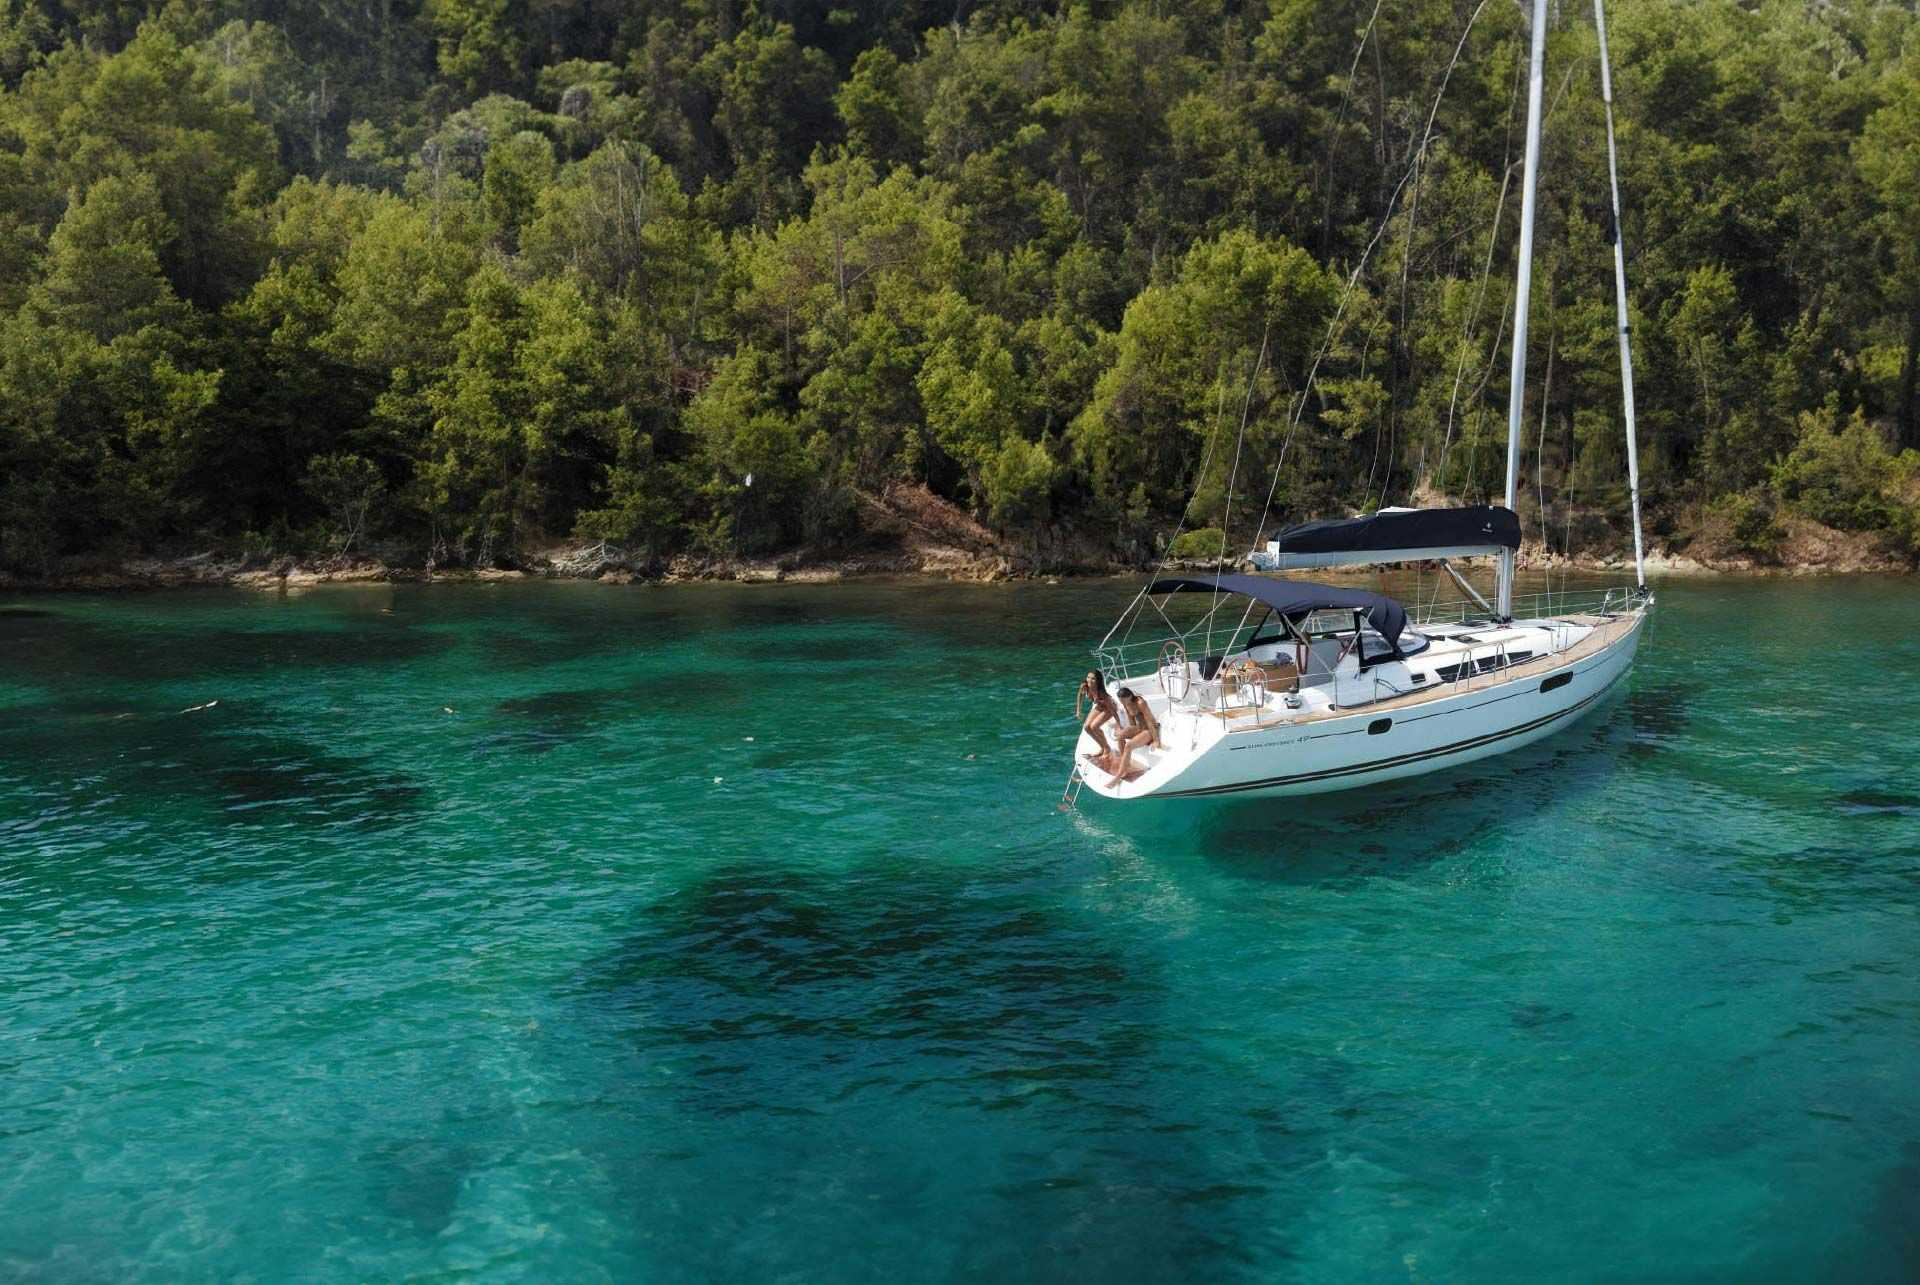 MedSailors Economy Yacht anchored in a clear water bay